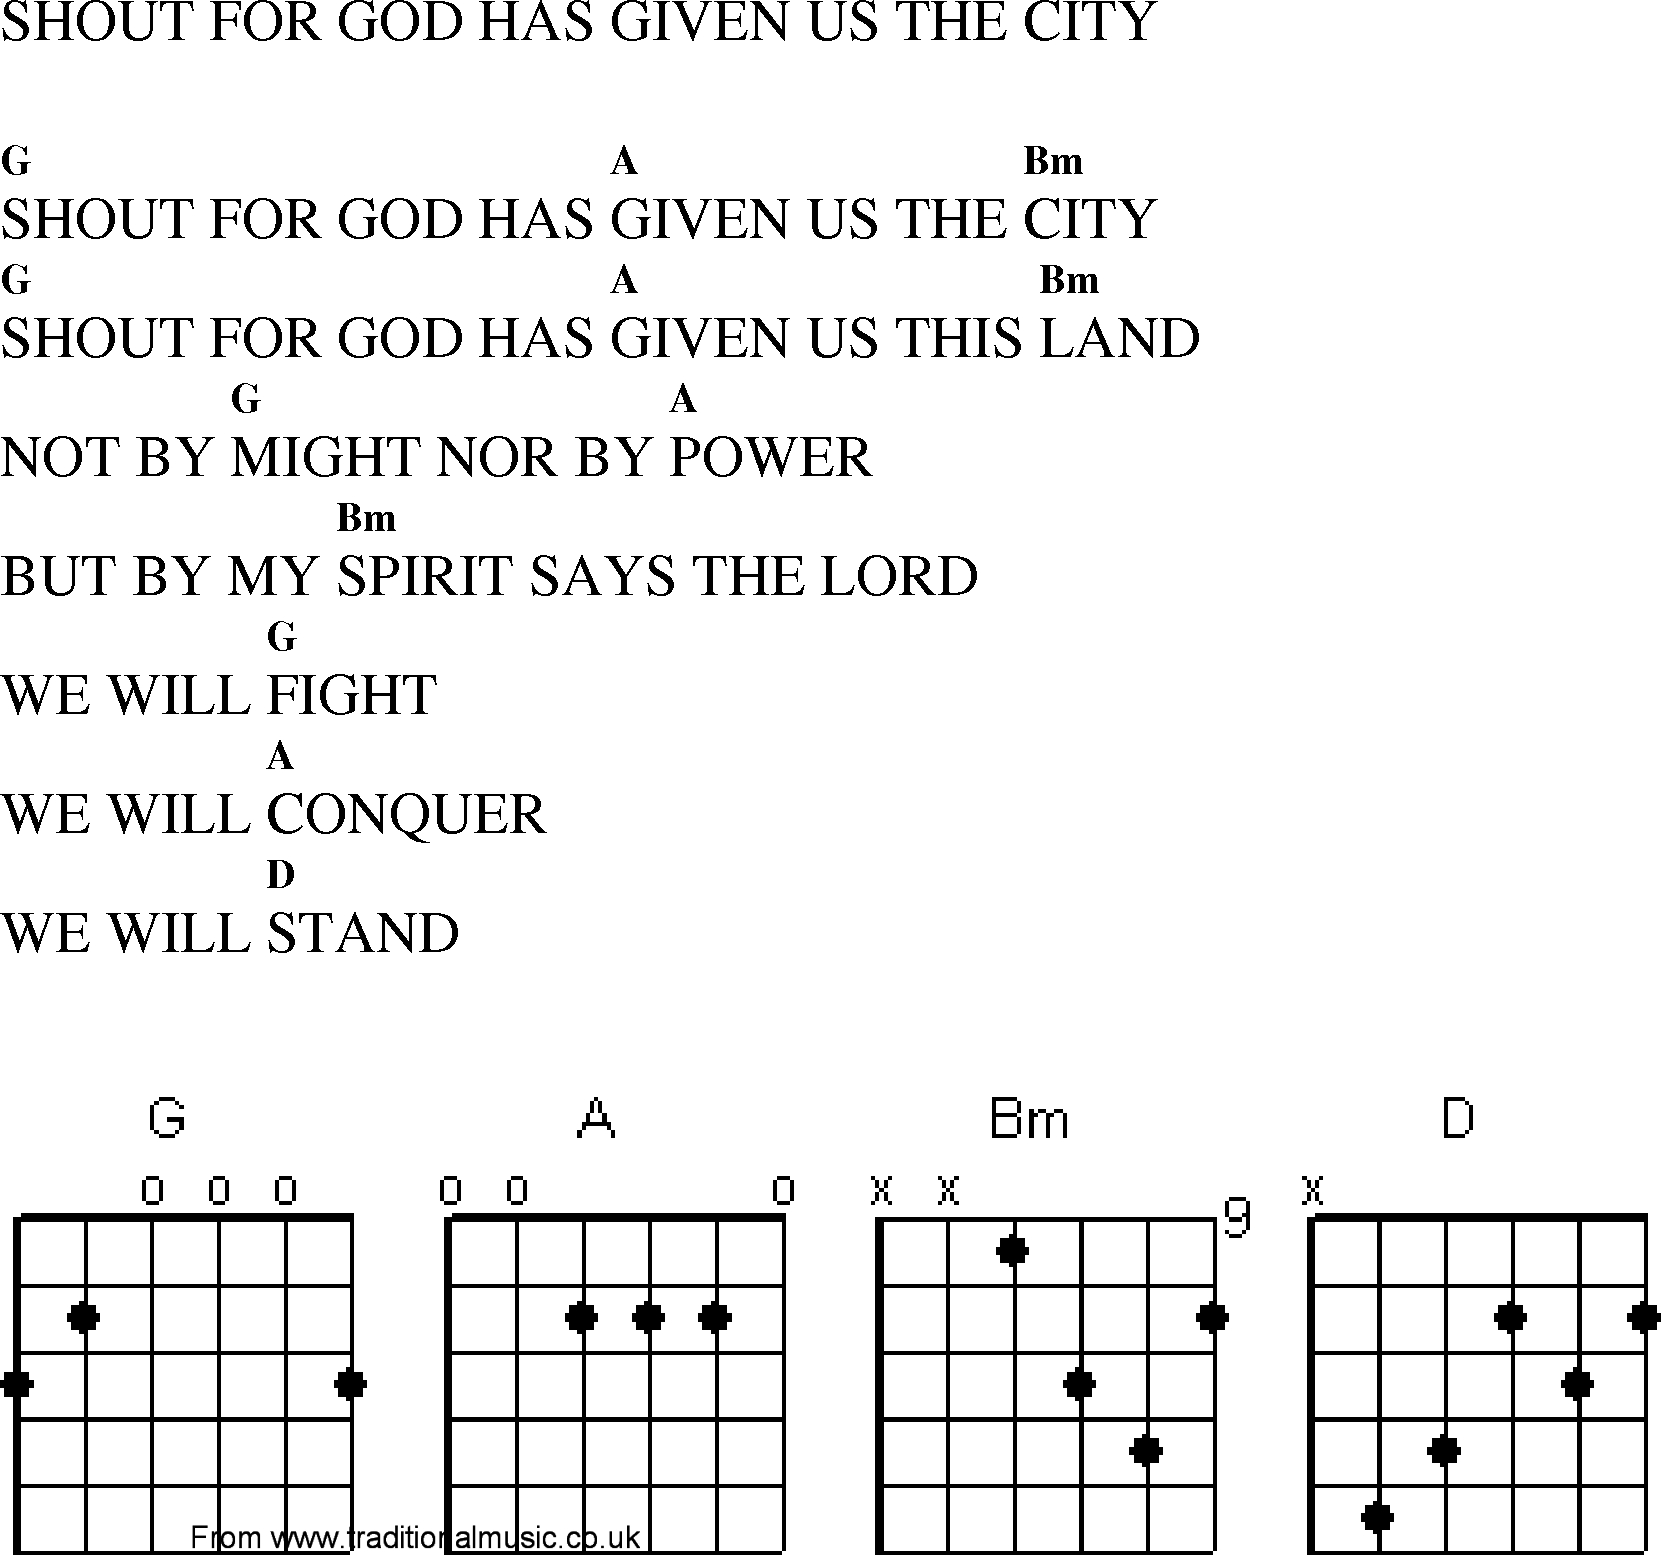 Shout To The Lord Chords Christian Gospel Worship Song Lyrics With Chords Shout For God Has